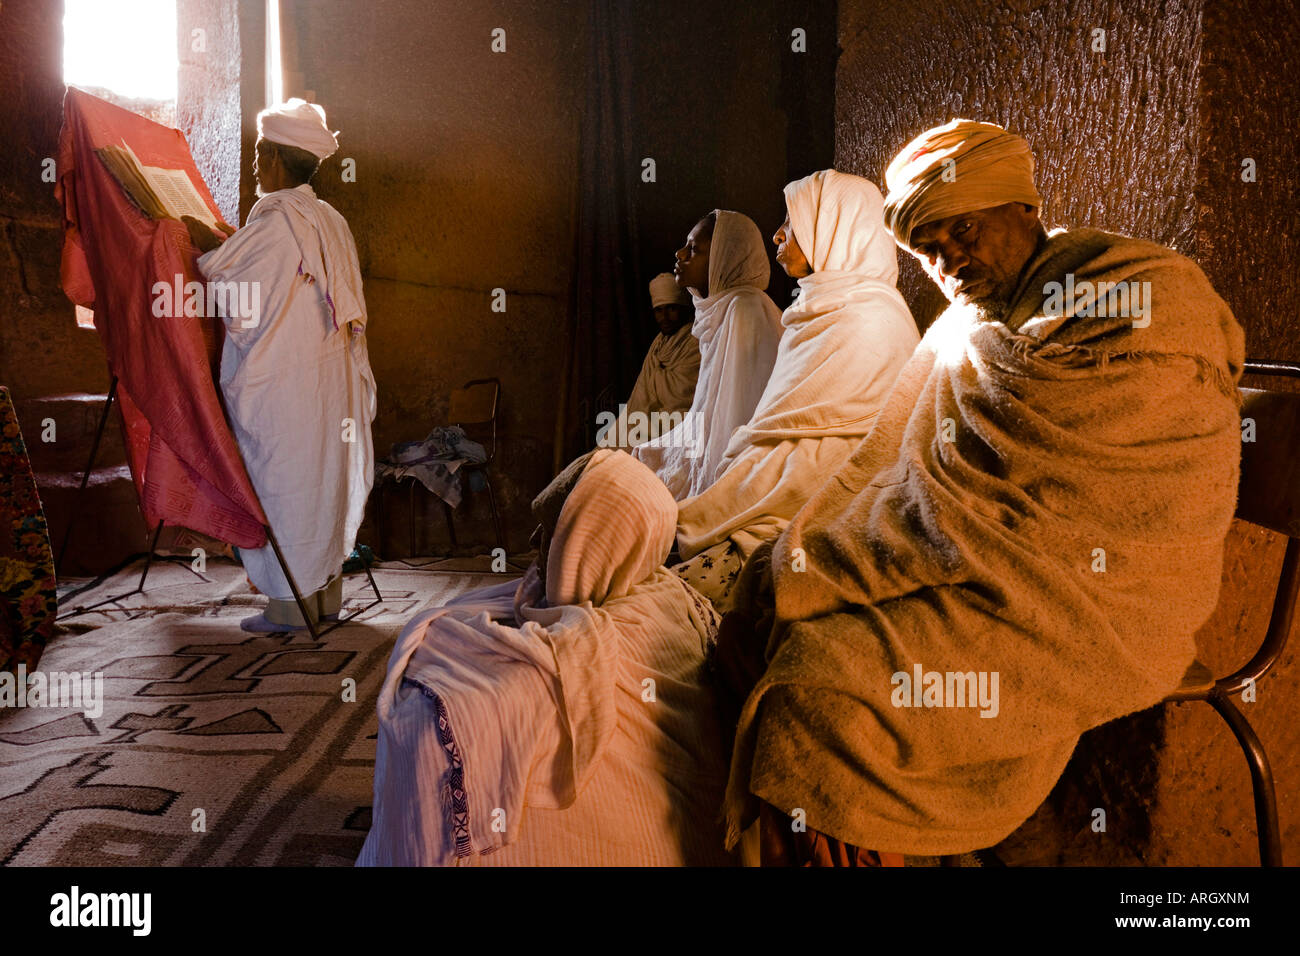 Group of people praying in a church, St. Gabriel Church, Lalibela, Ethiopia Stock Photo